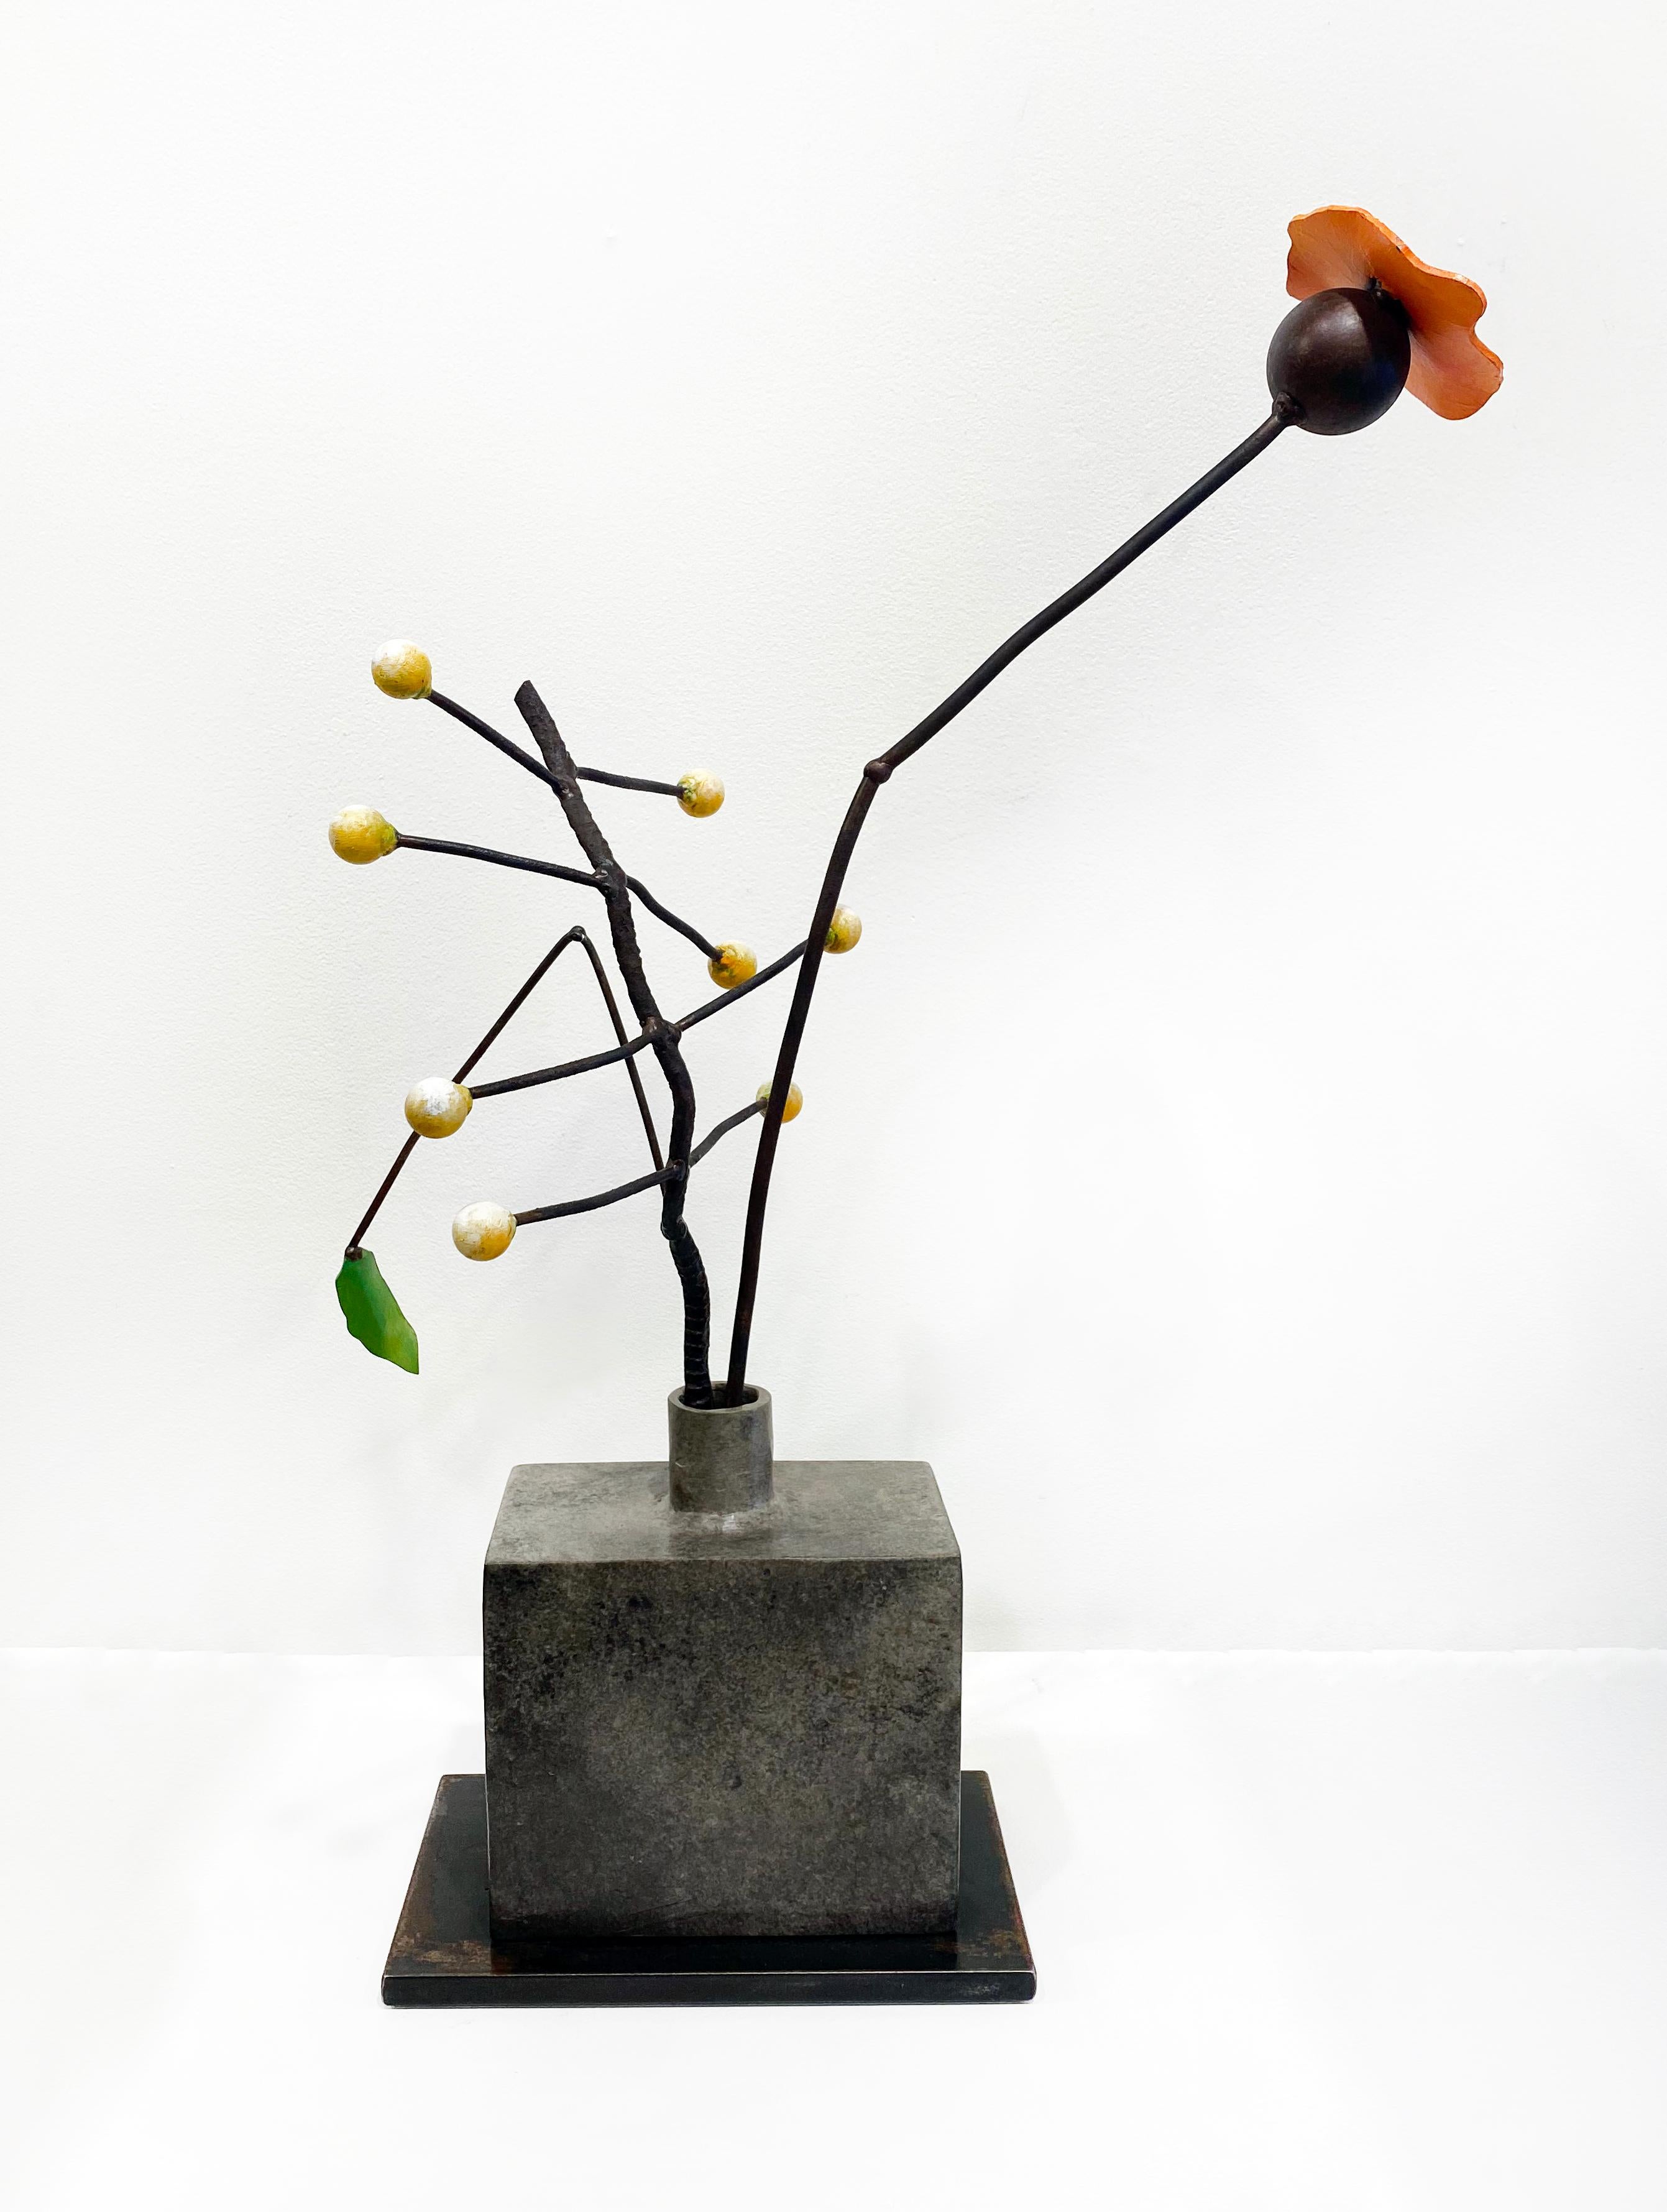 Bronze and Steel Sculpture by David Kimball Anderson 'Poppy, Seeds'